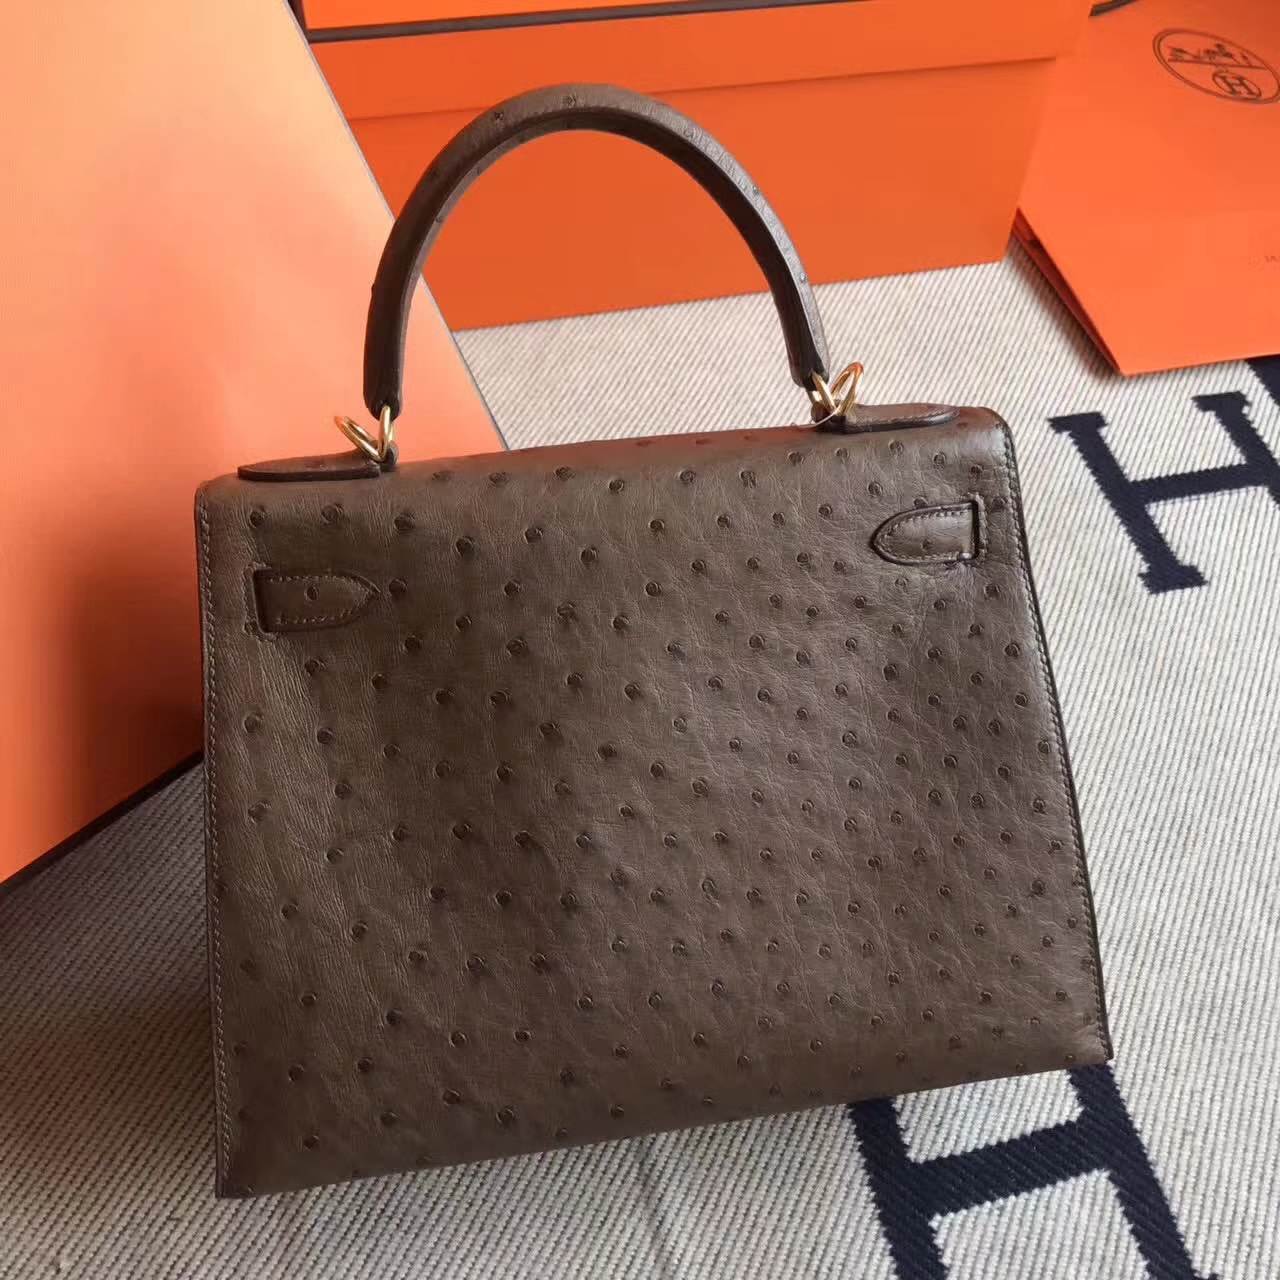 Fashion Hermes Ostrich Leather Kelly Bag 28cm in CK18 Etoupe Grey